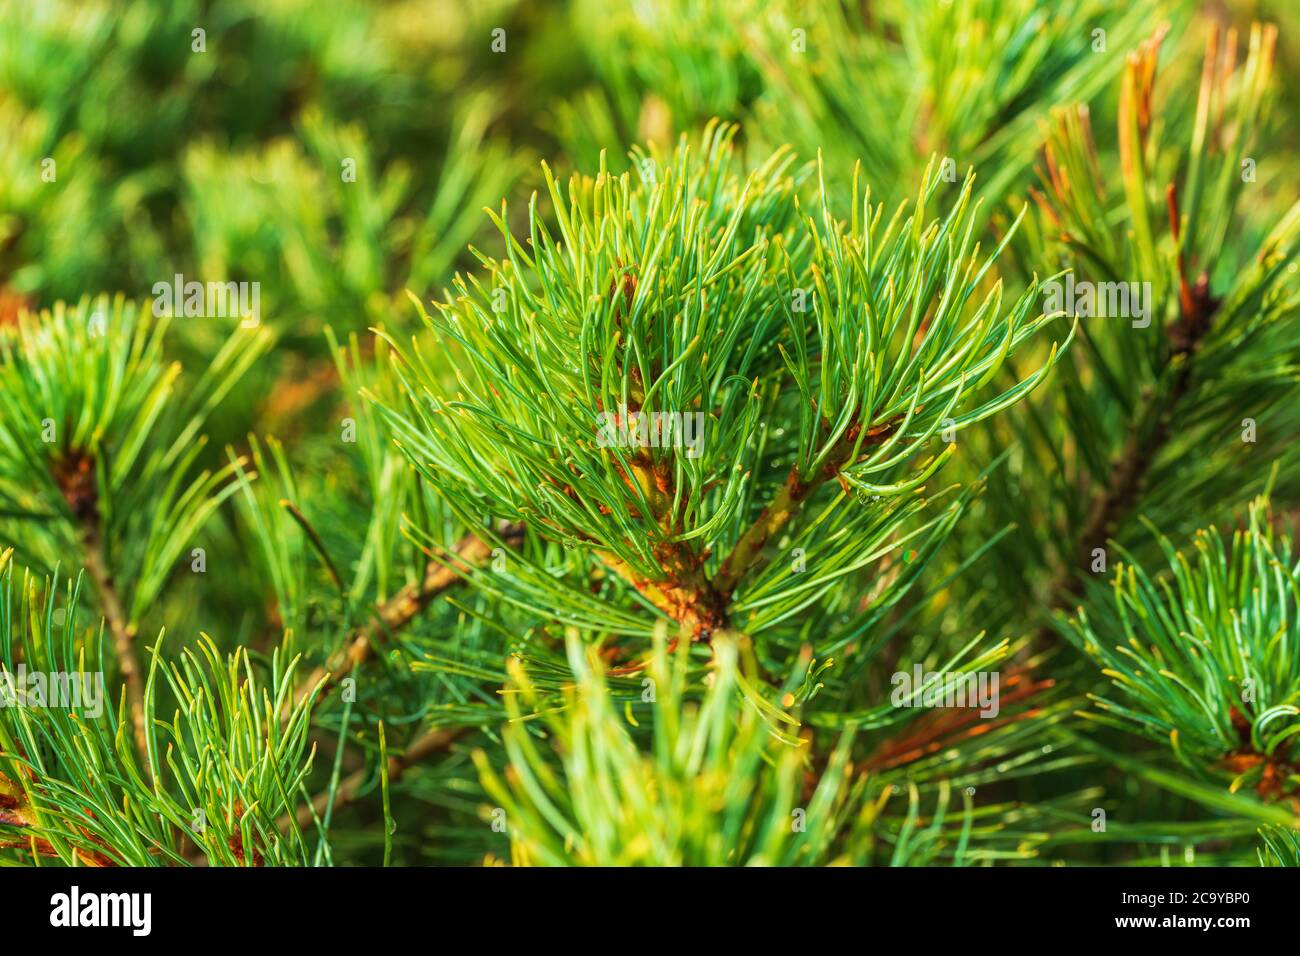 Close-up view of needles of shrub Siberian Stone Pine Pinus Pumila. Natural medicinal plant used in folk and traditional medicine. Christmas mood Stock Photo